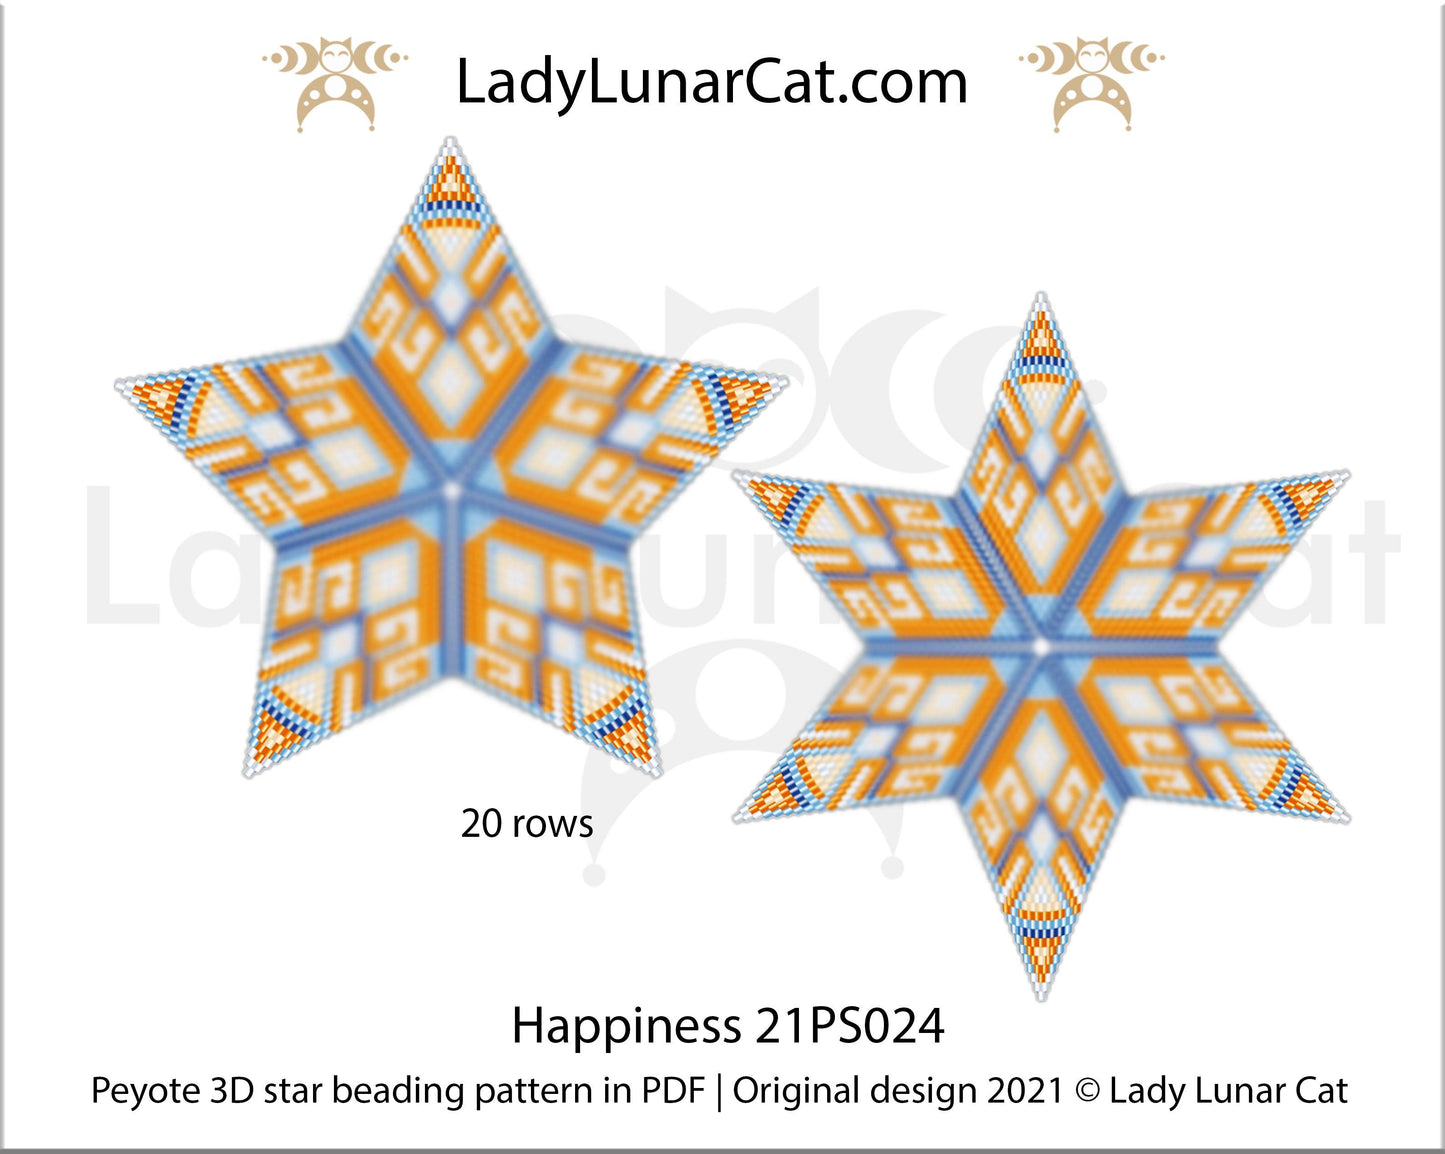 Beaded star pattern for beading- Happiness 21PS024 20 rows LadyLunarCat